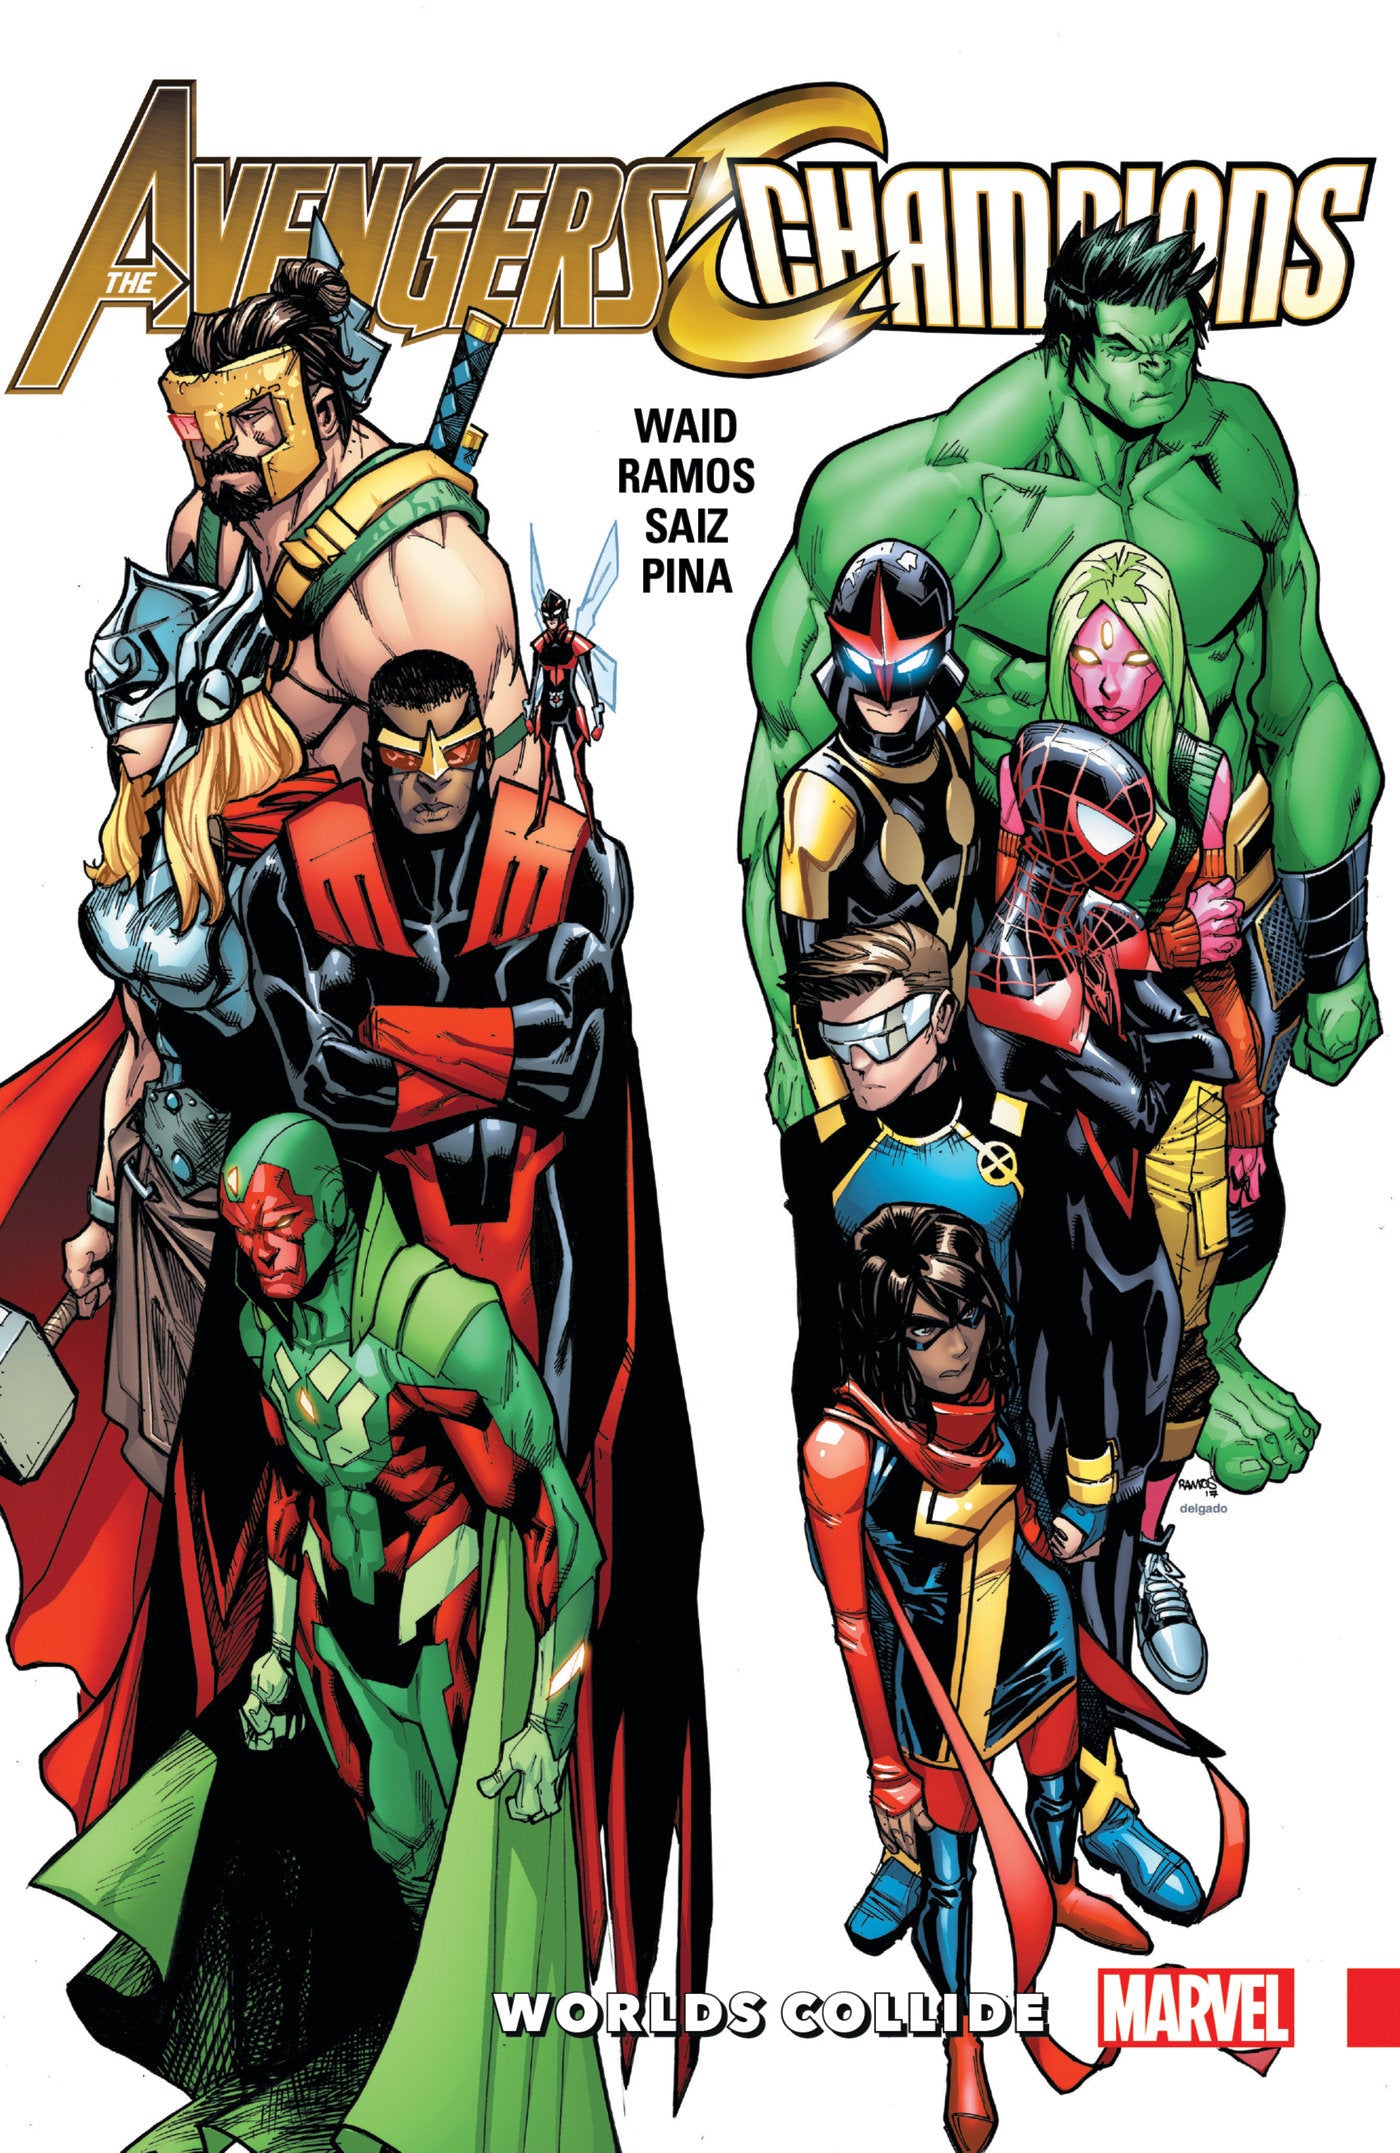 AVENGERS & CHAMPIONS: WORLDS COLLIDE TRADE PAPERBACK